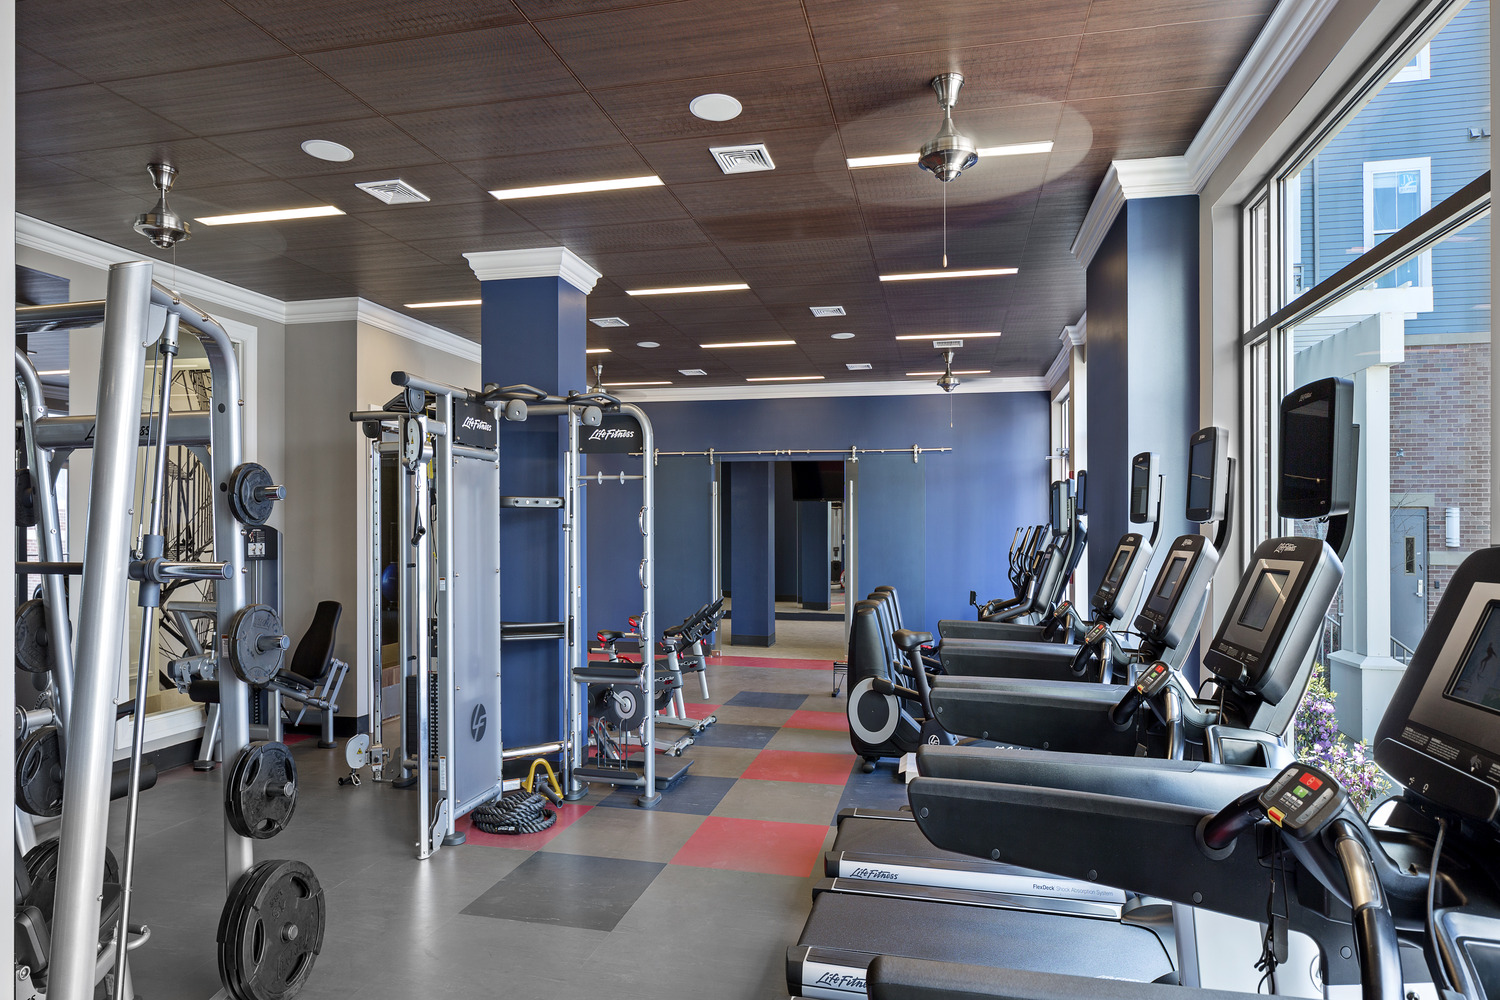 Watertown Mews : 24-hour club-quality fitness center